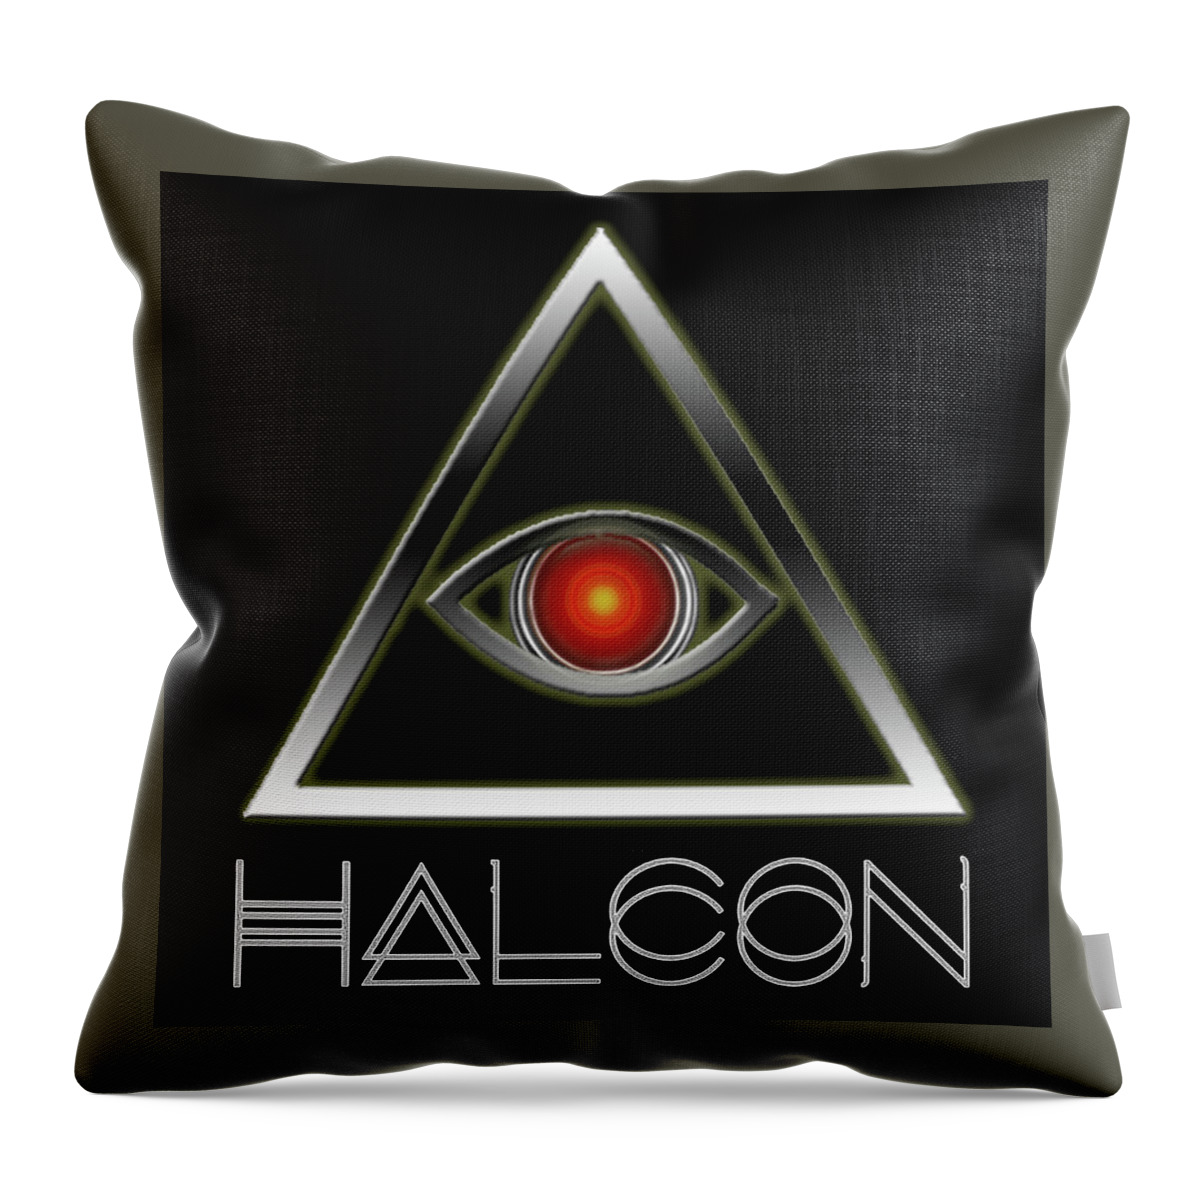 Wunderle Art Throw Pillow featuring the digital art HALCON eyecon by Wunderle